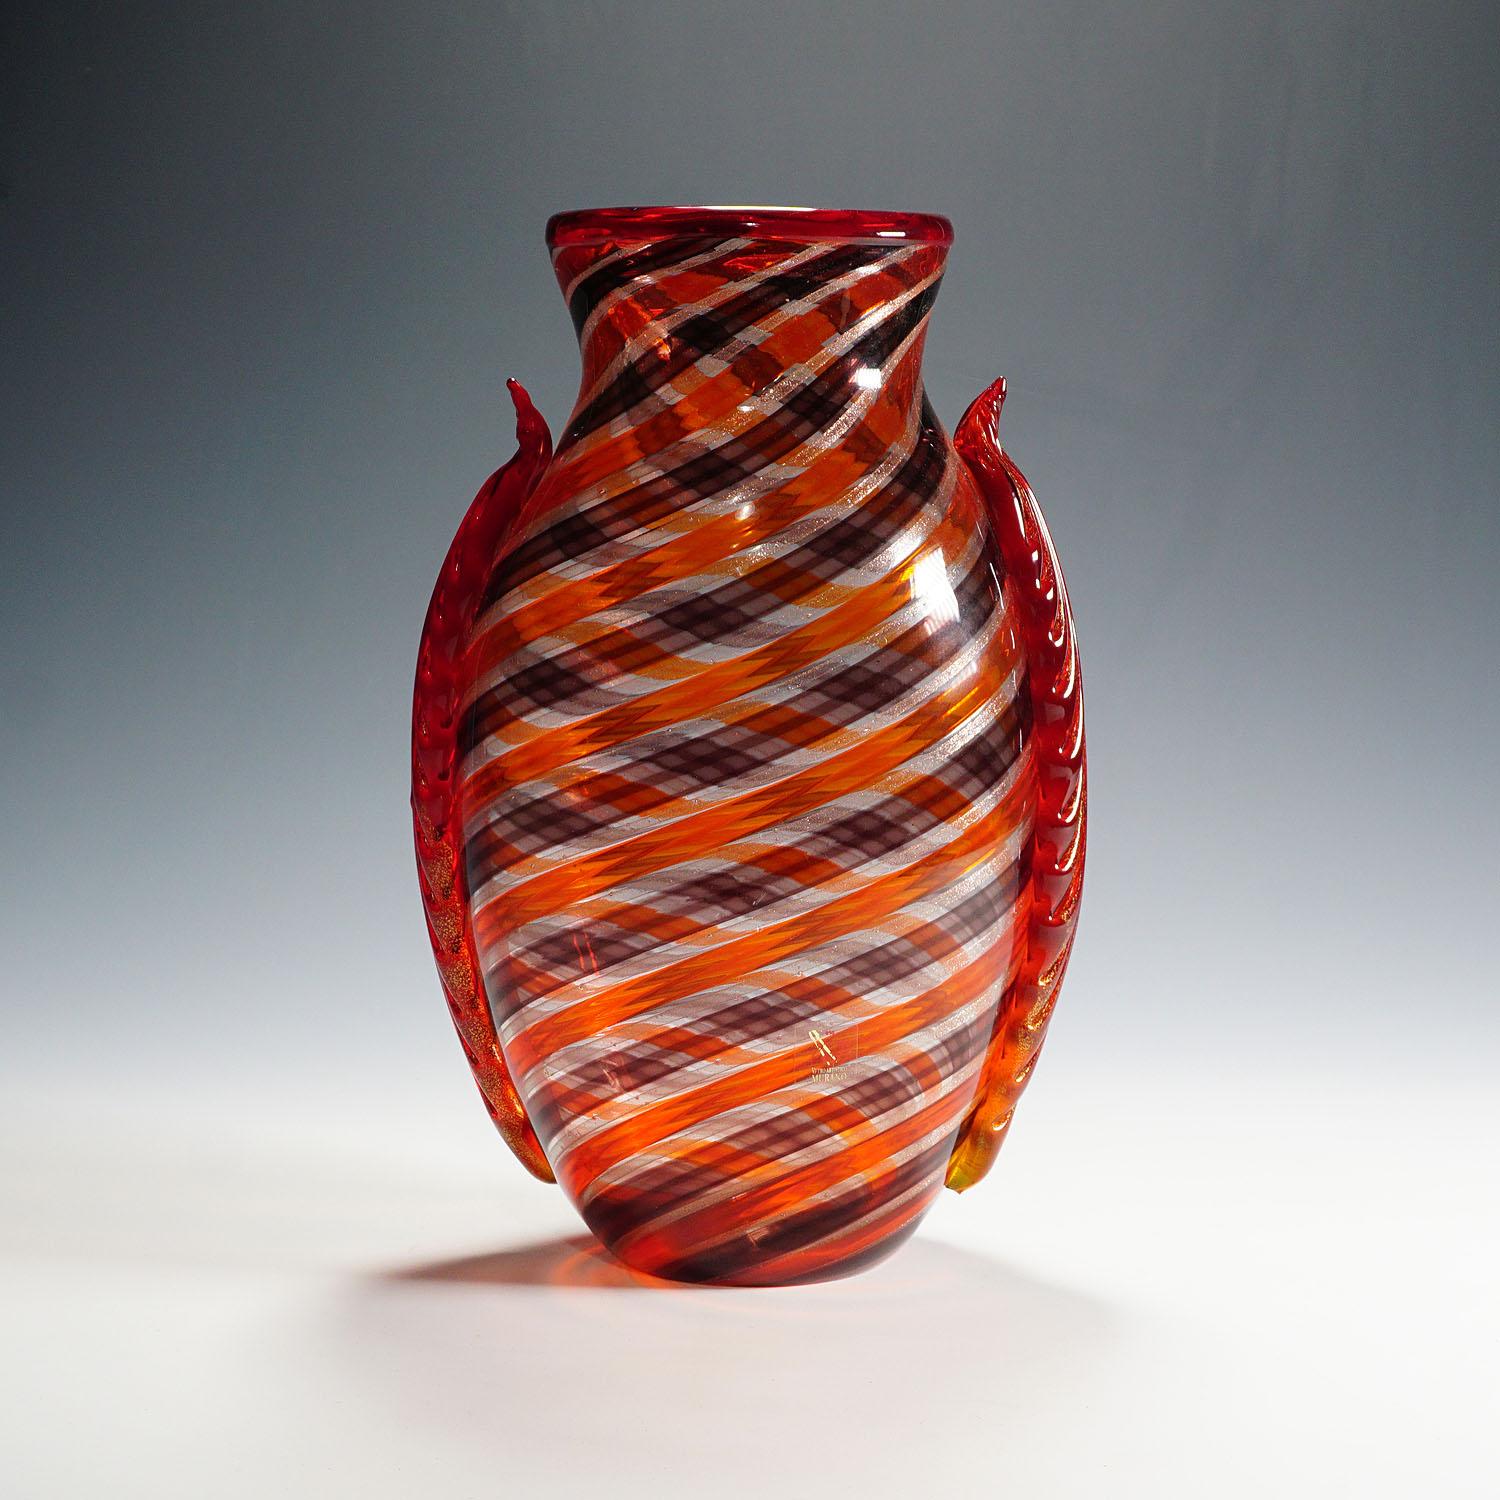 A large Murano art glass vase, designed and made by Eugenio Ferro & C. 1929 srl in 2009. Thick clear glass with spiral pattern in orange, aubergine and aventurine. Two lateral applications made of orange glass with some gold inclusions. Vetro